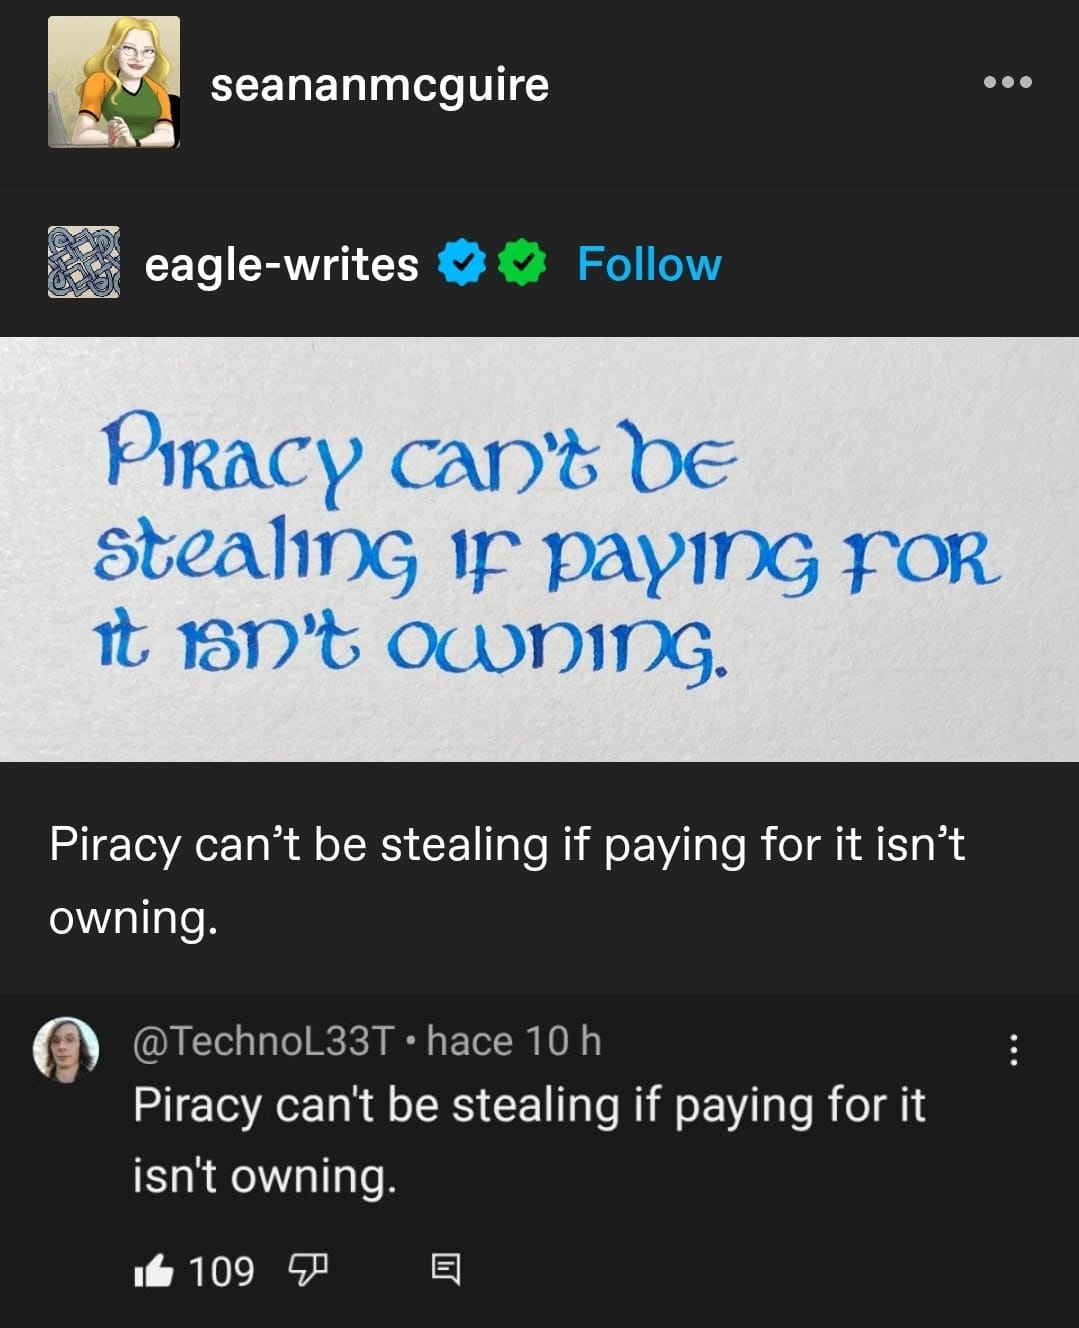 Piracy can't be stealing if paying for it isn't owning.